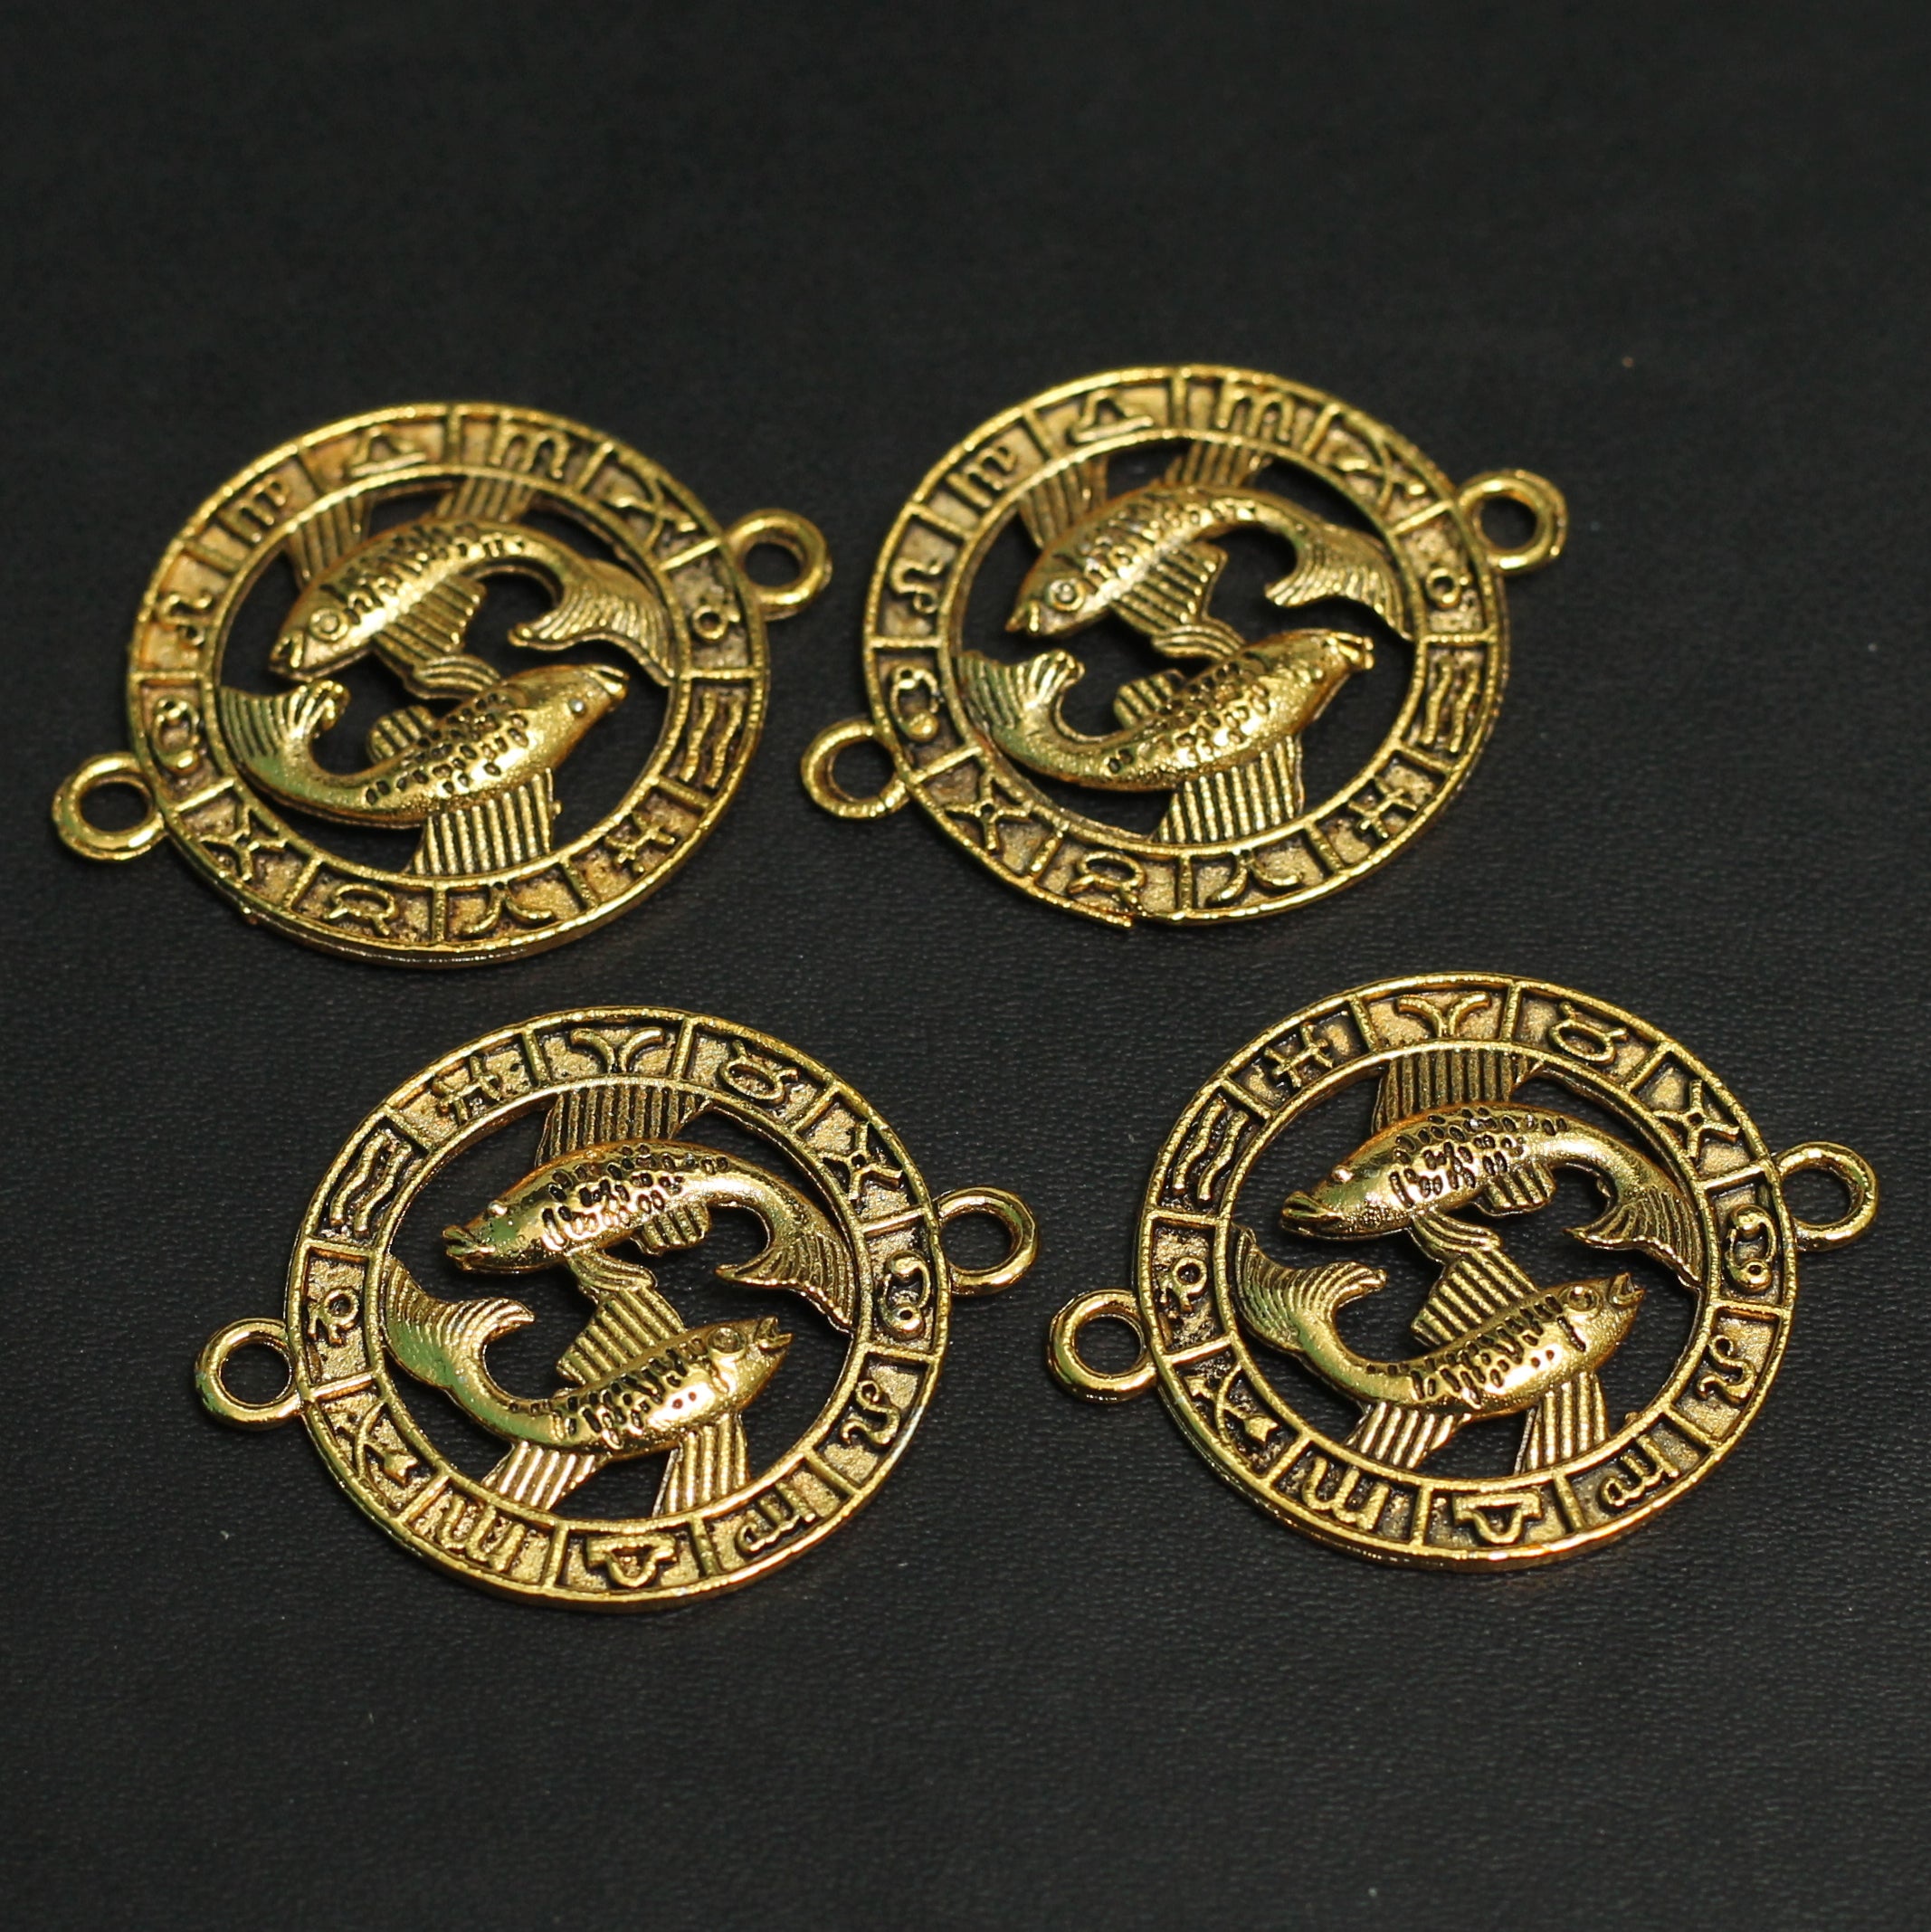 6 Pcs Fish Round  Charms Connector